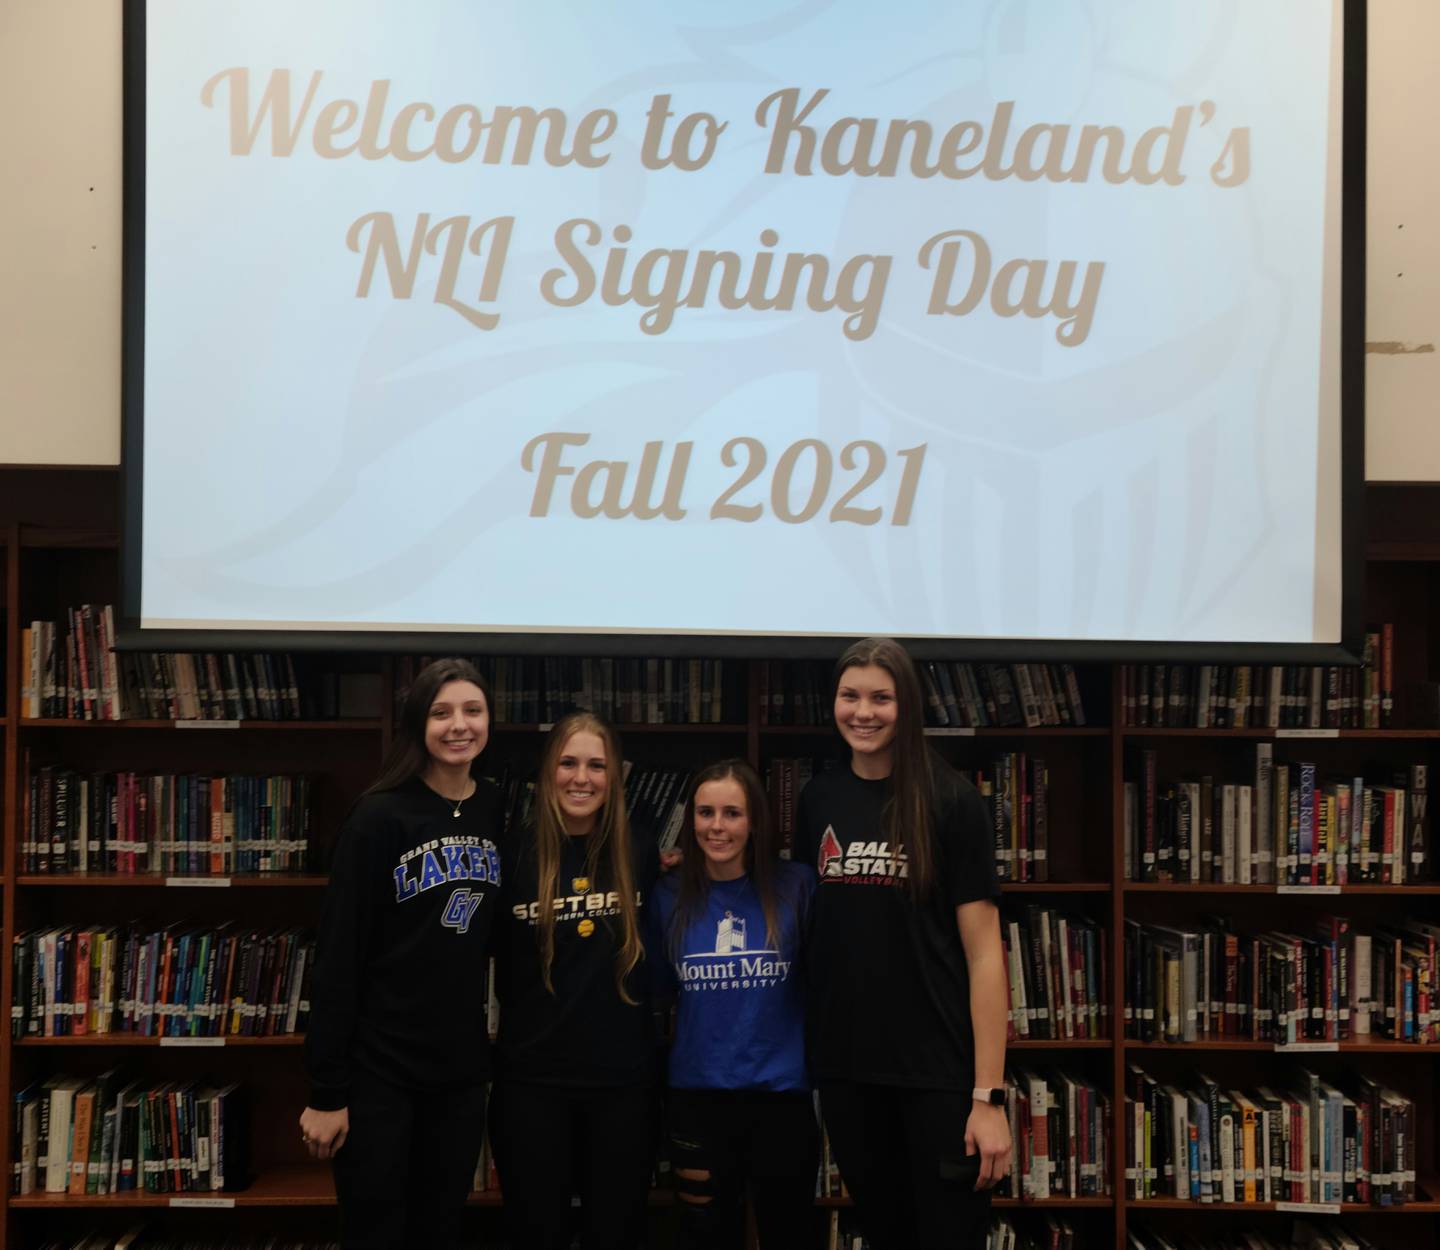 Kaneland volleyball player Megan O'Sullivan, softball players Grace Algrim and Taylor Hames, and volleyball player Madison Buckley pose at a signing day ceremony Wednesday, November 10.